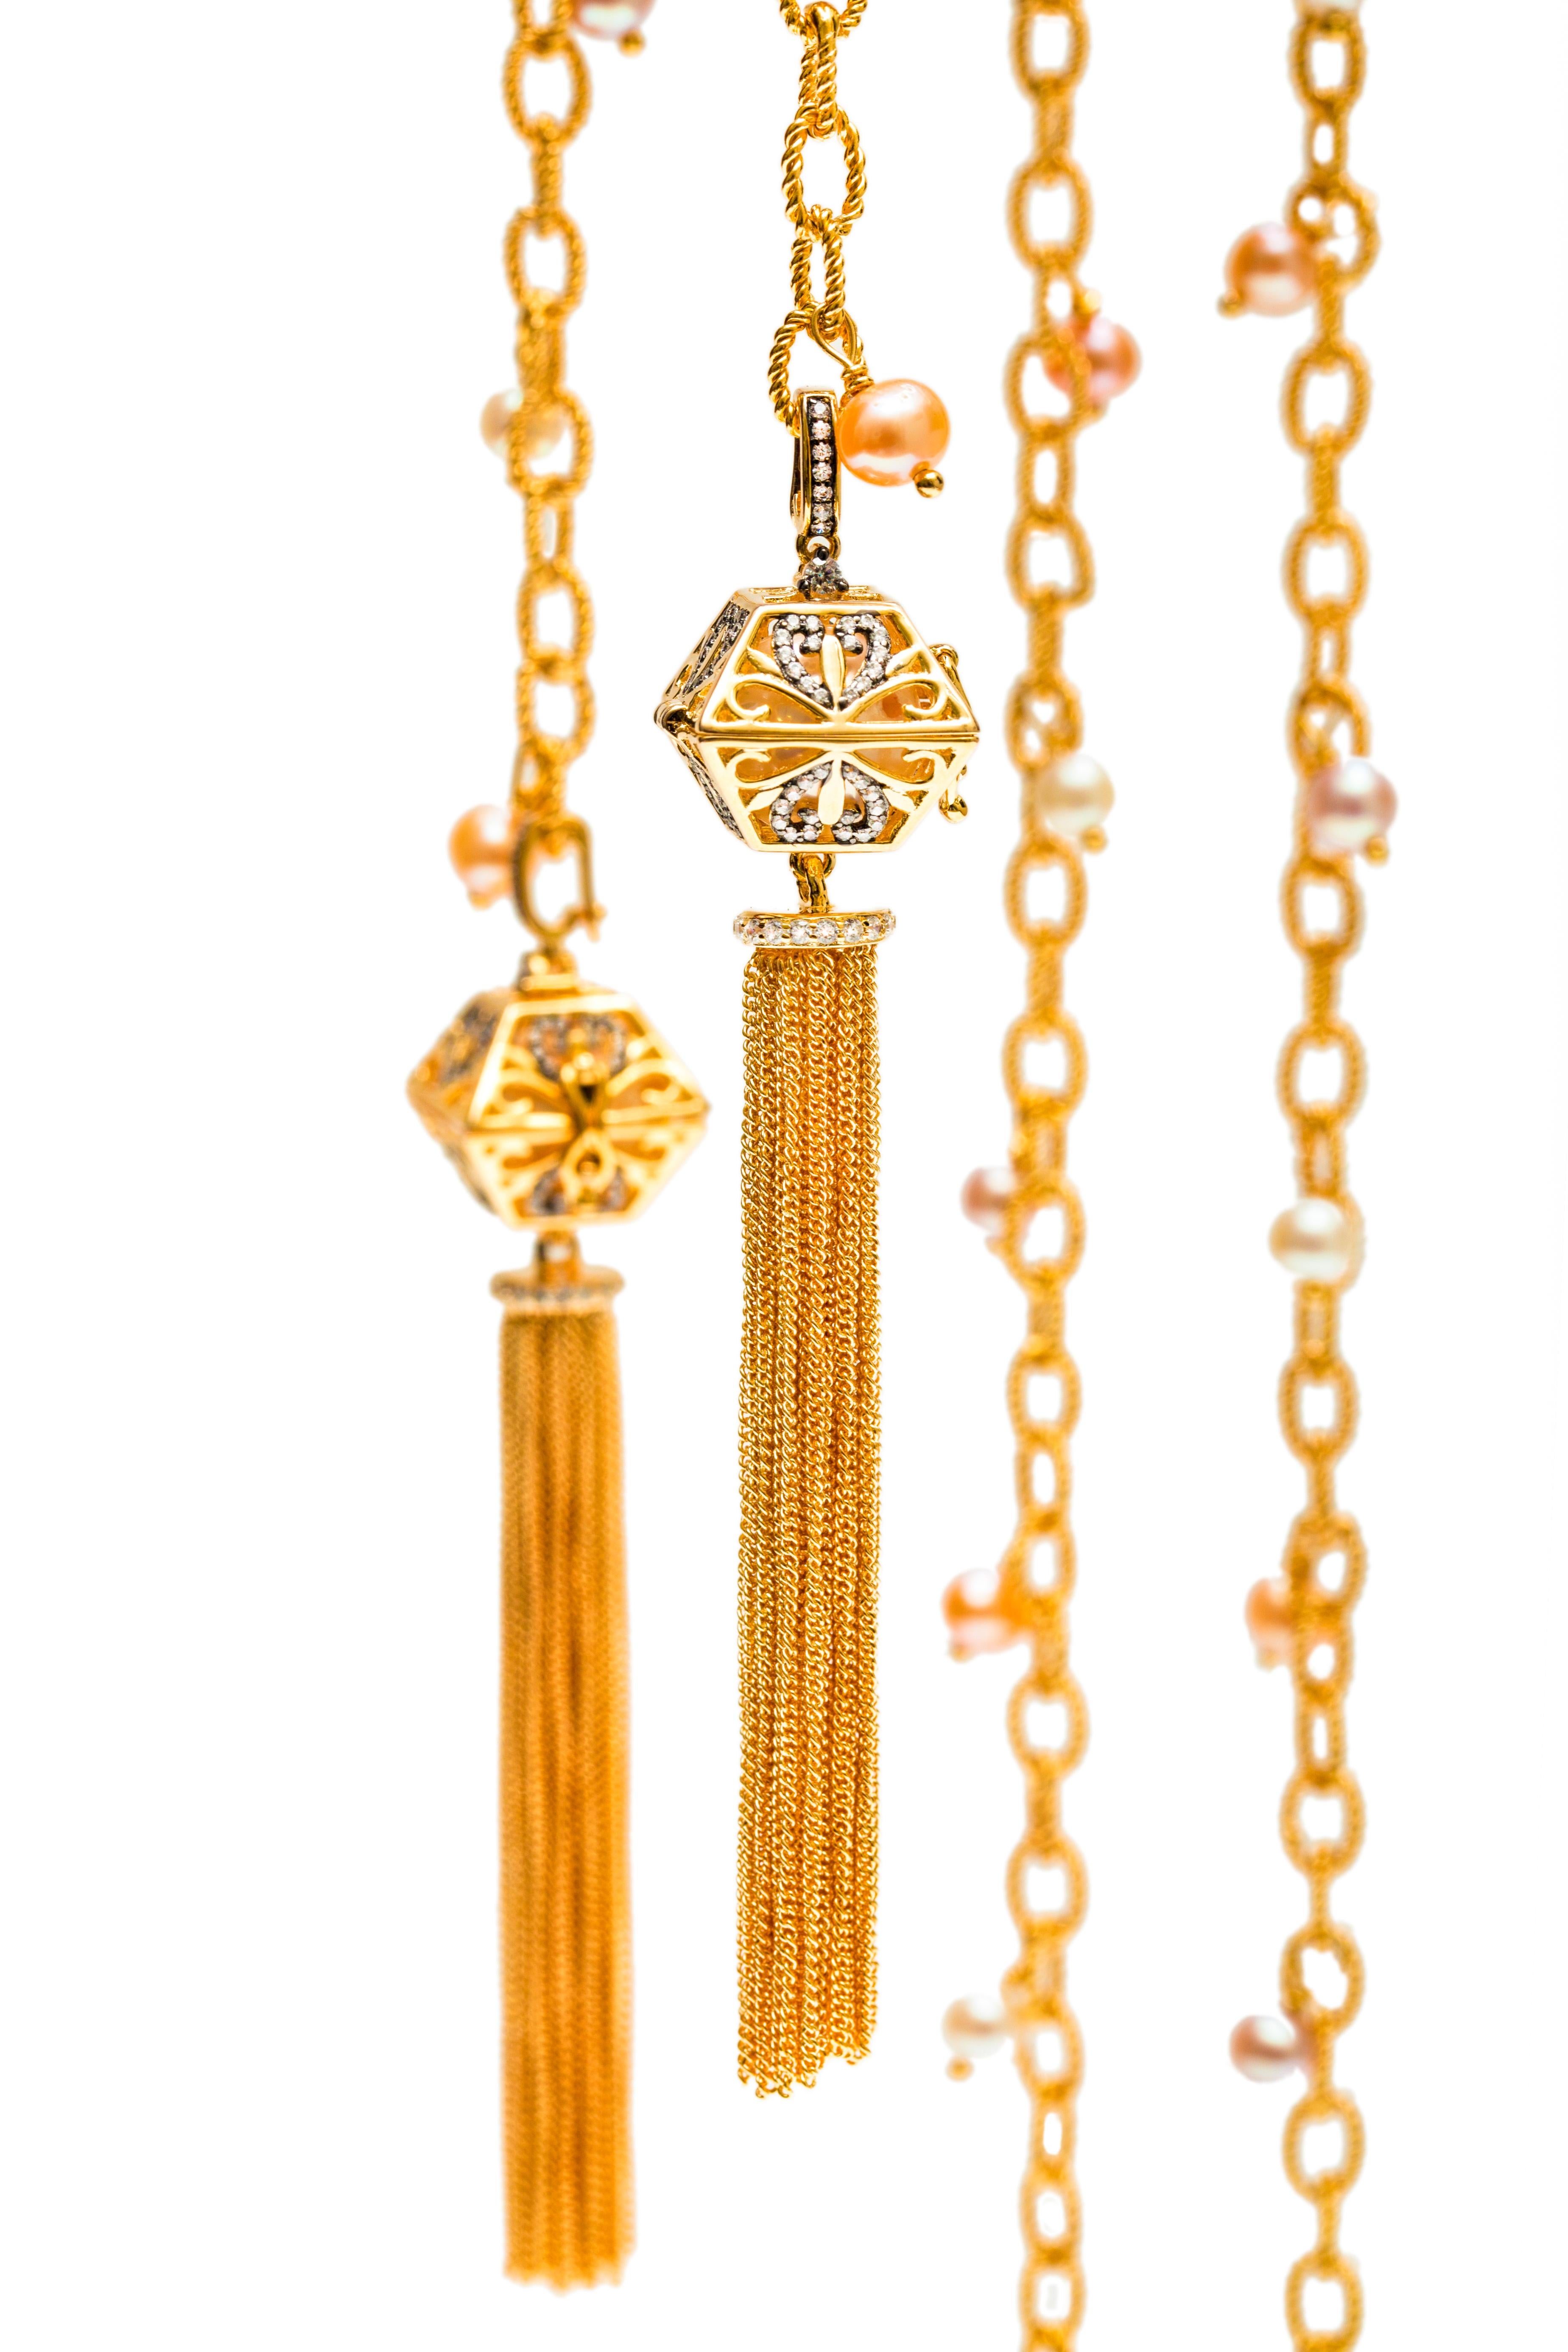 Part of our Sa'mma Collection, a statement piece to reflect your individuality and beaut. length of chain is 120 inches. You can style it in different ways to add an edgy elegance on any outfit. Vermeil gold- sterling silver with 18K gold plating